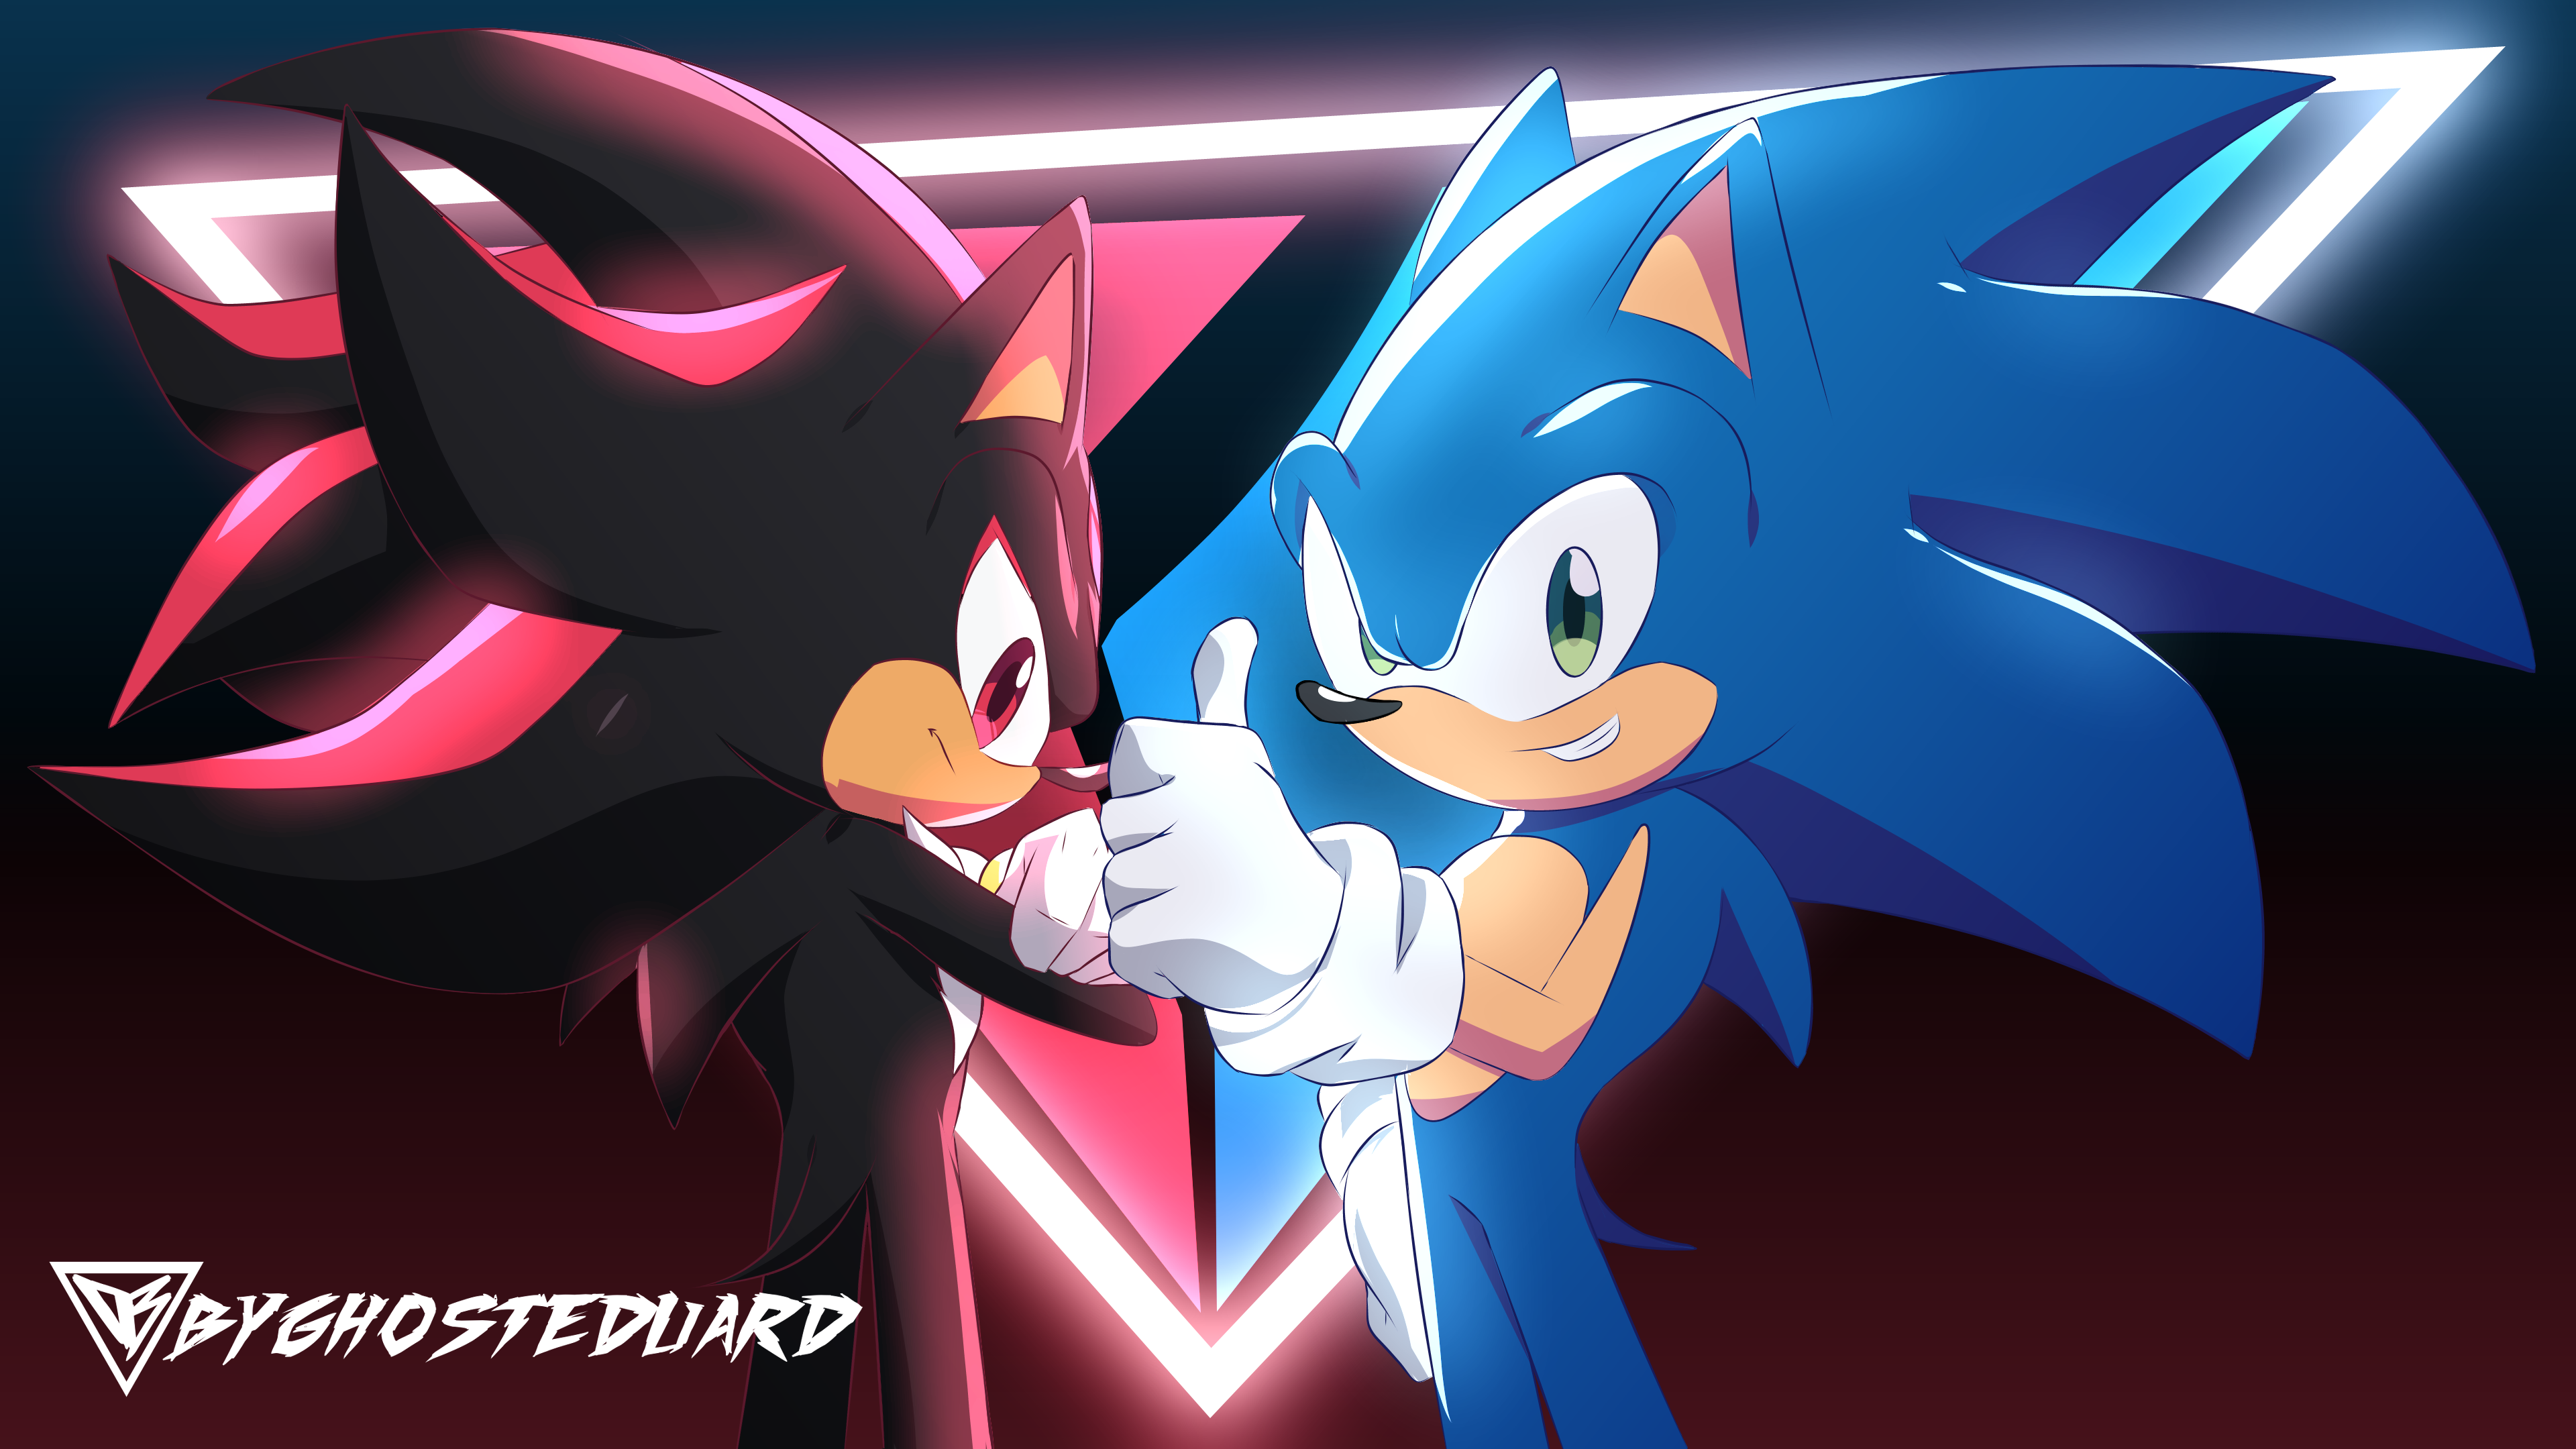 Sonic and Shadow by ByGhostEduard on DeviantArt